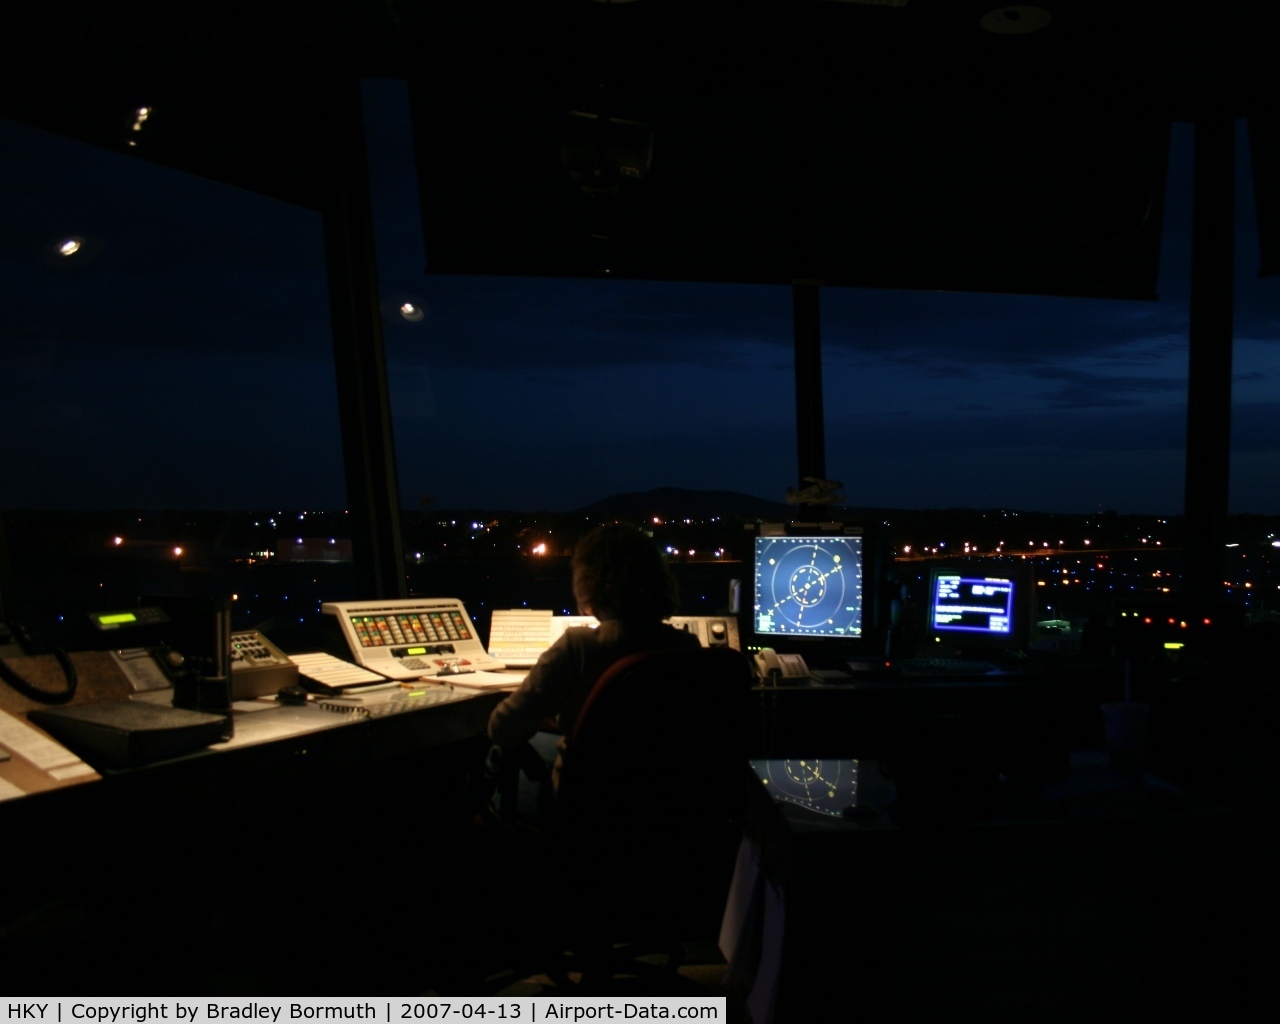 Hickory Regional Airport (HKY) - View of the inside of the control tower at Hickory about an hour after sunset.